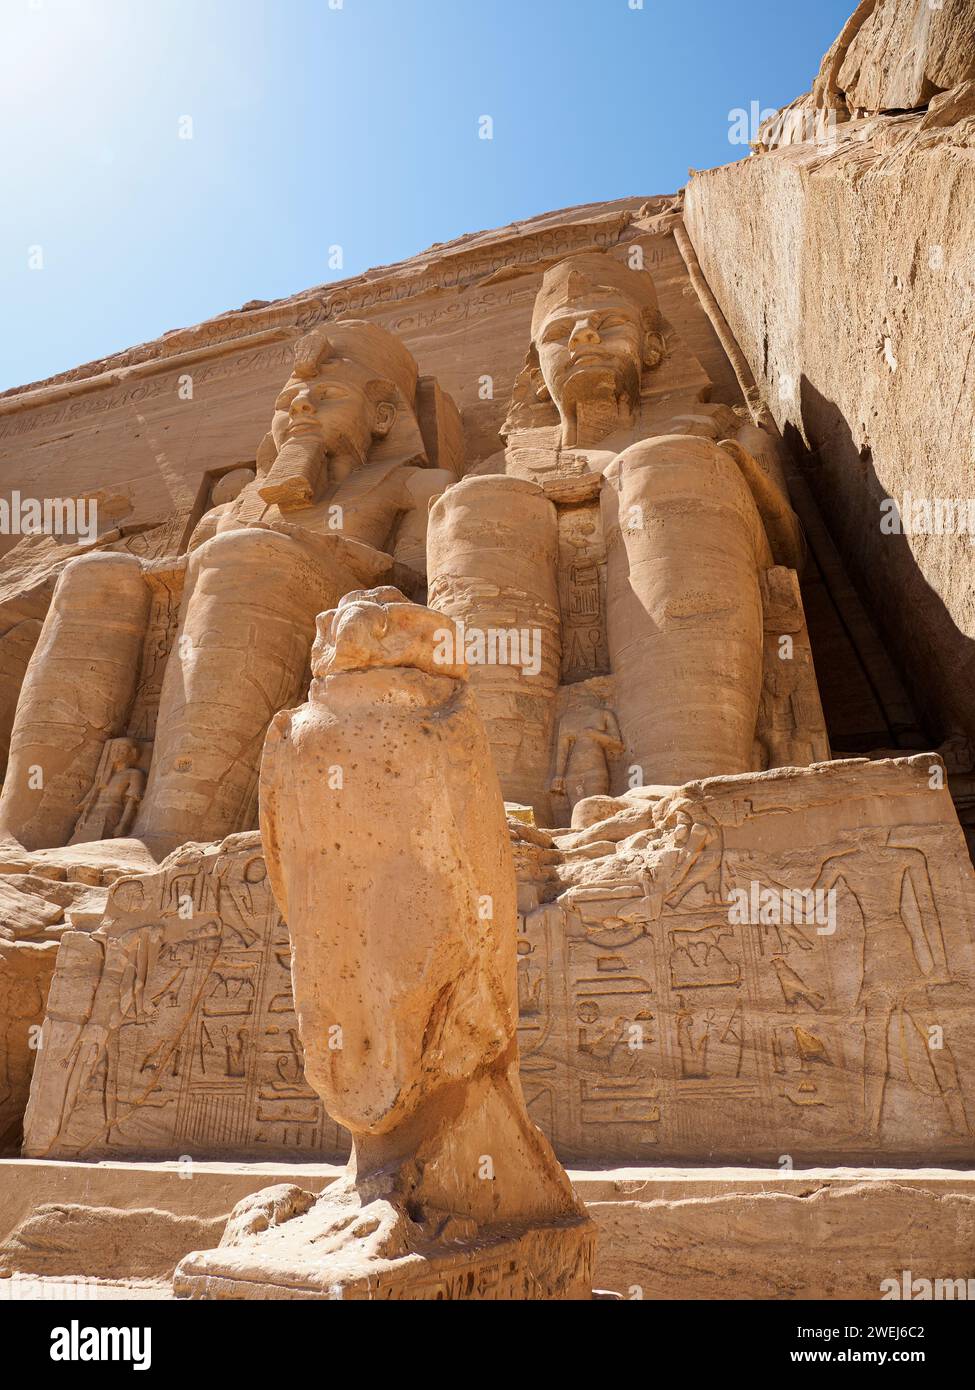 The Great Temple of Abu Simbel with its four iconic 20 meter tall seated colossal statues of Ramses II, Egypt. Stock Photo